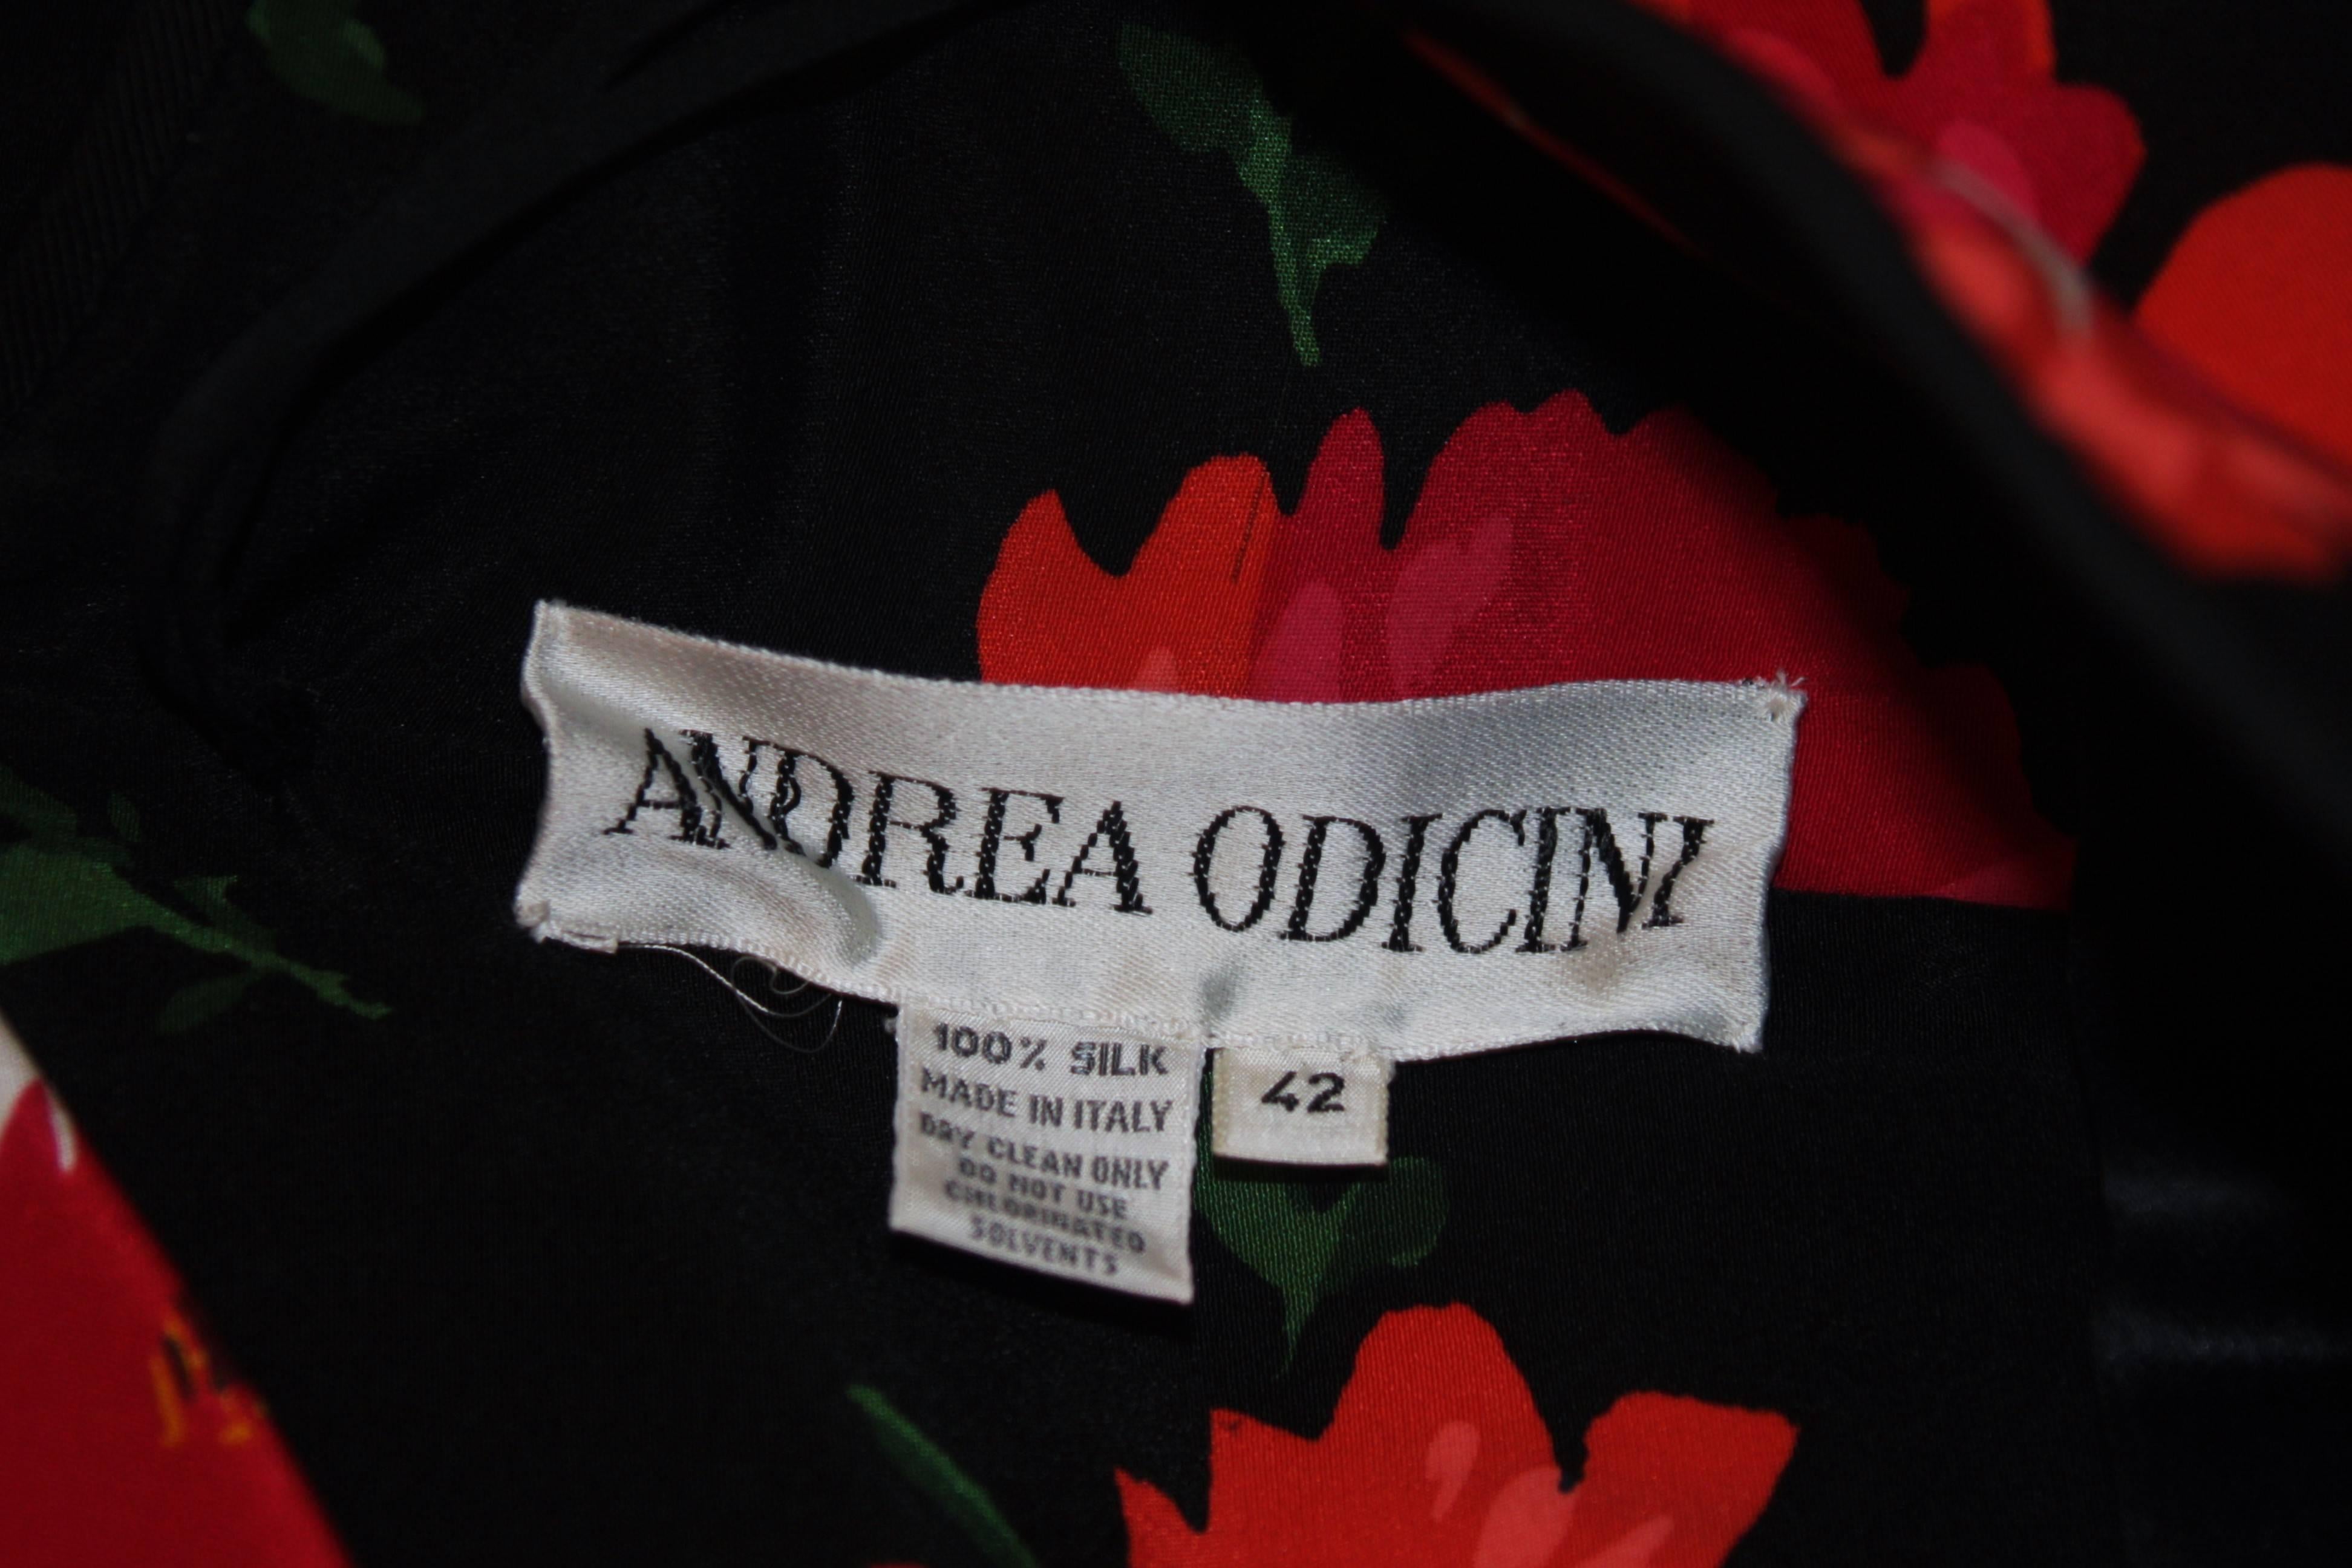 ANDREA ODICINI Black Silk Floral Print Cocktail Dress with Peplum Size 42 For Sale 4